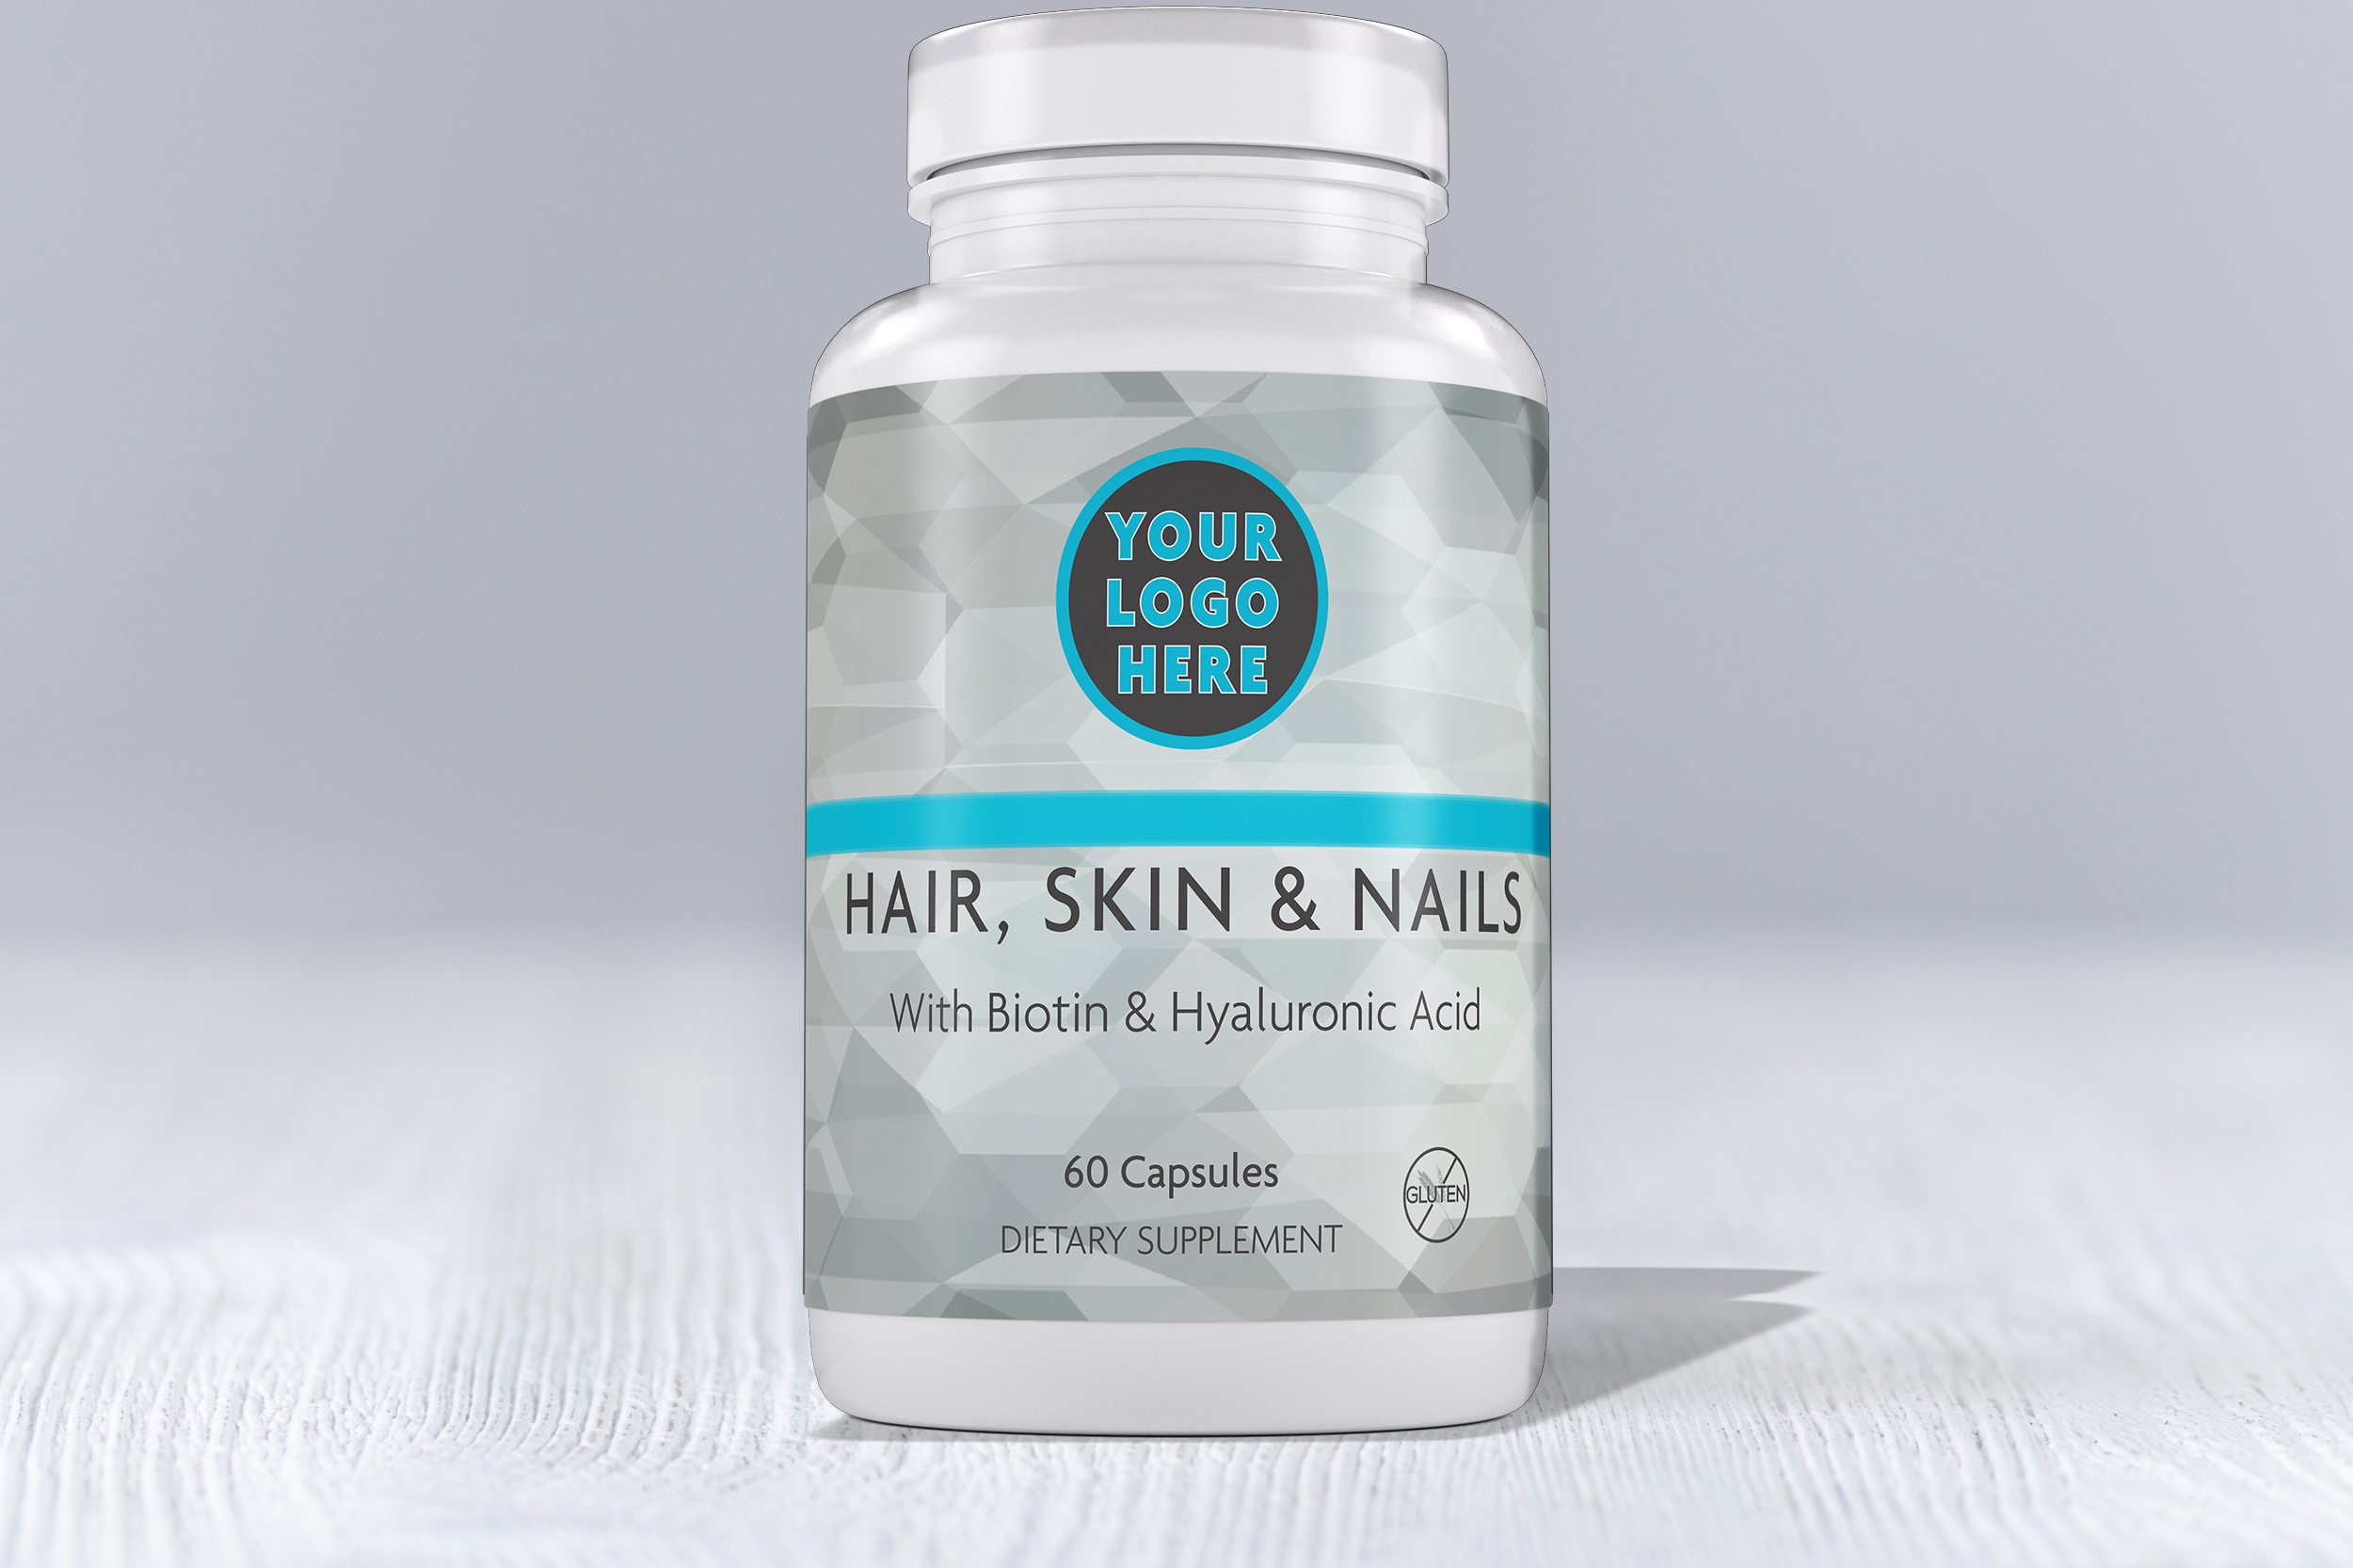 Hair, Skin & Nails Support Capsules